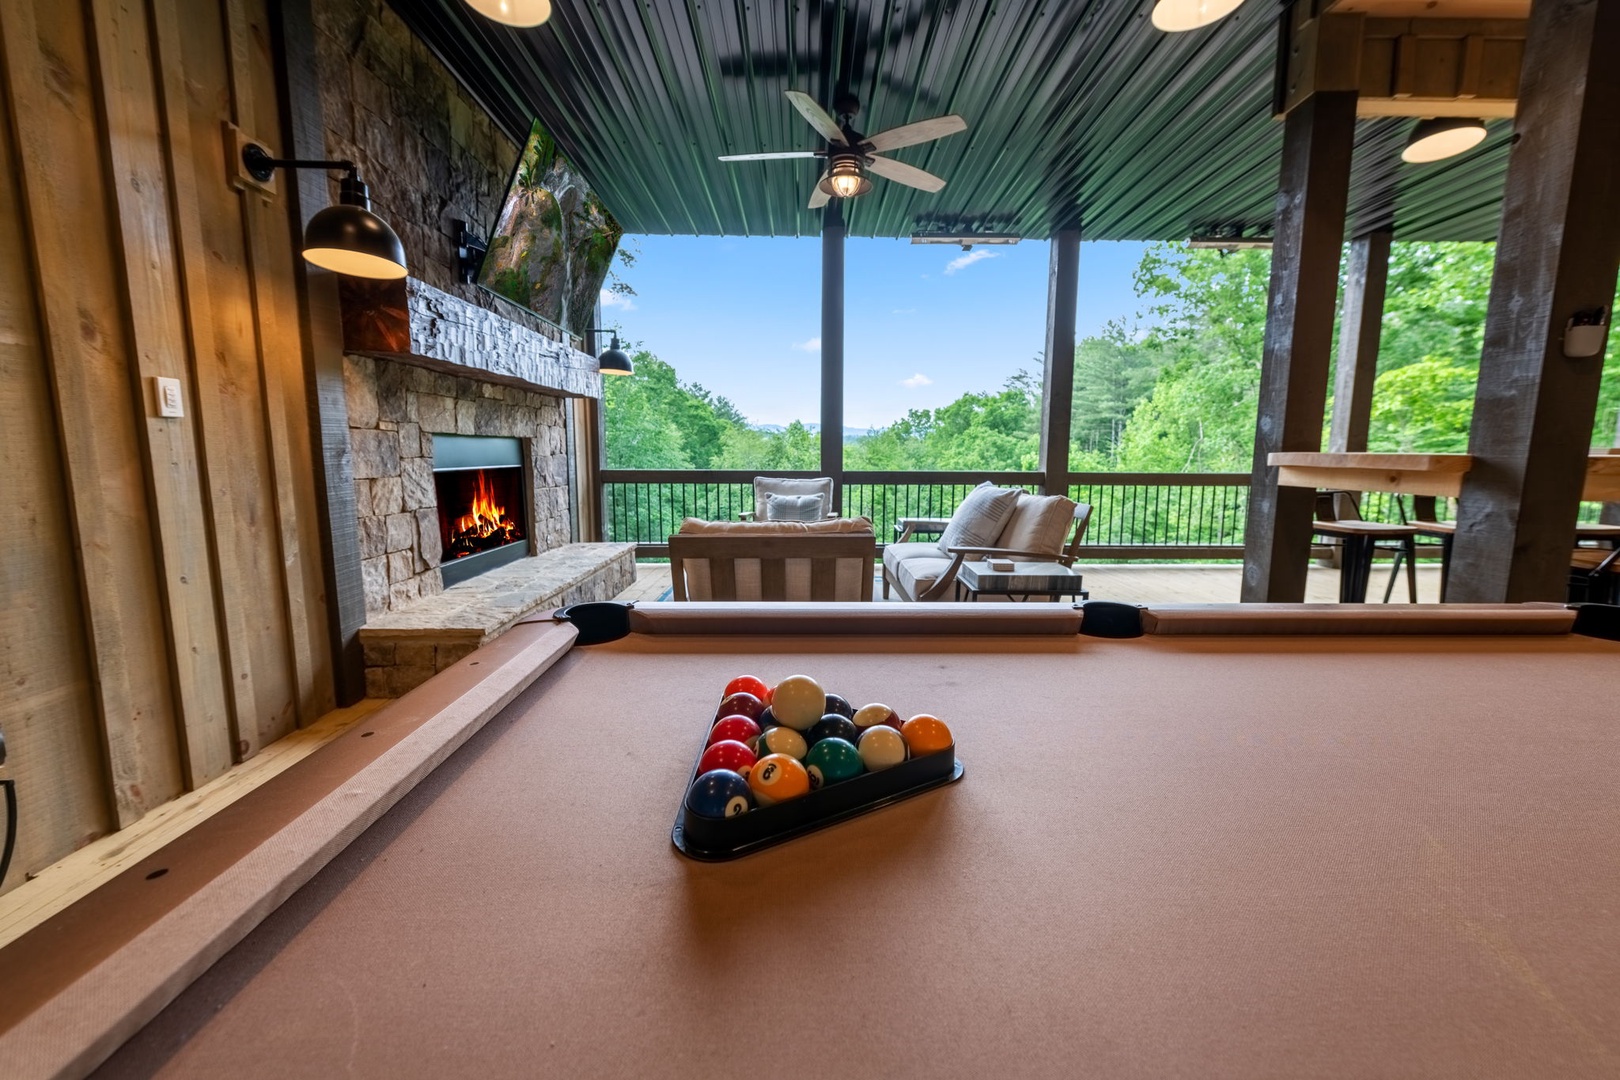 Rich Mountain Chateau Lower Level Deck Pool Table